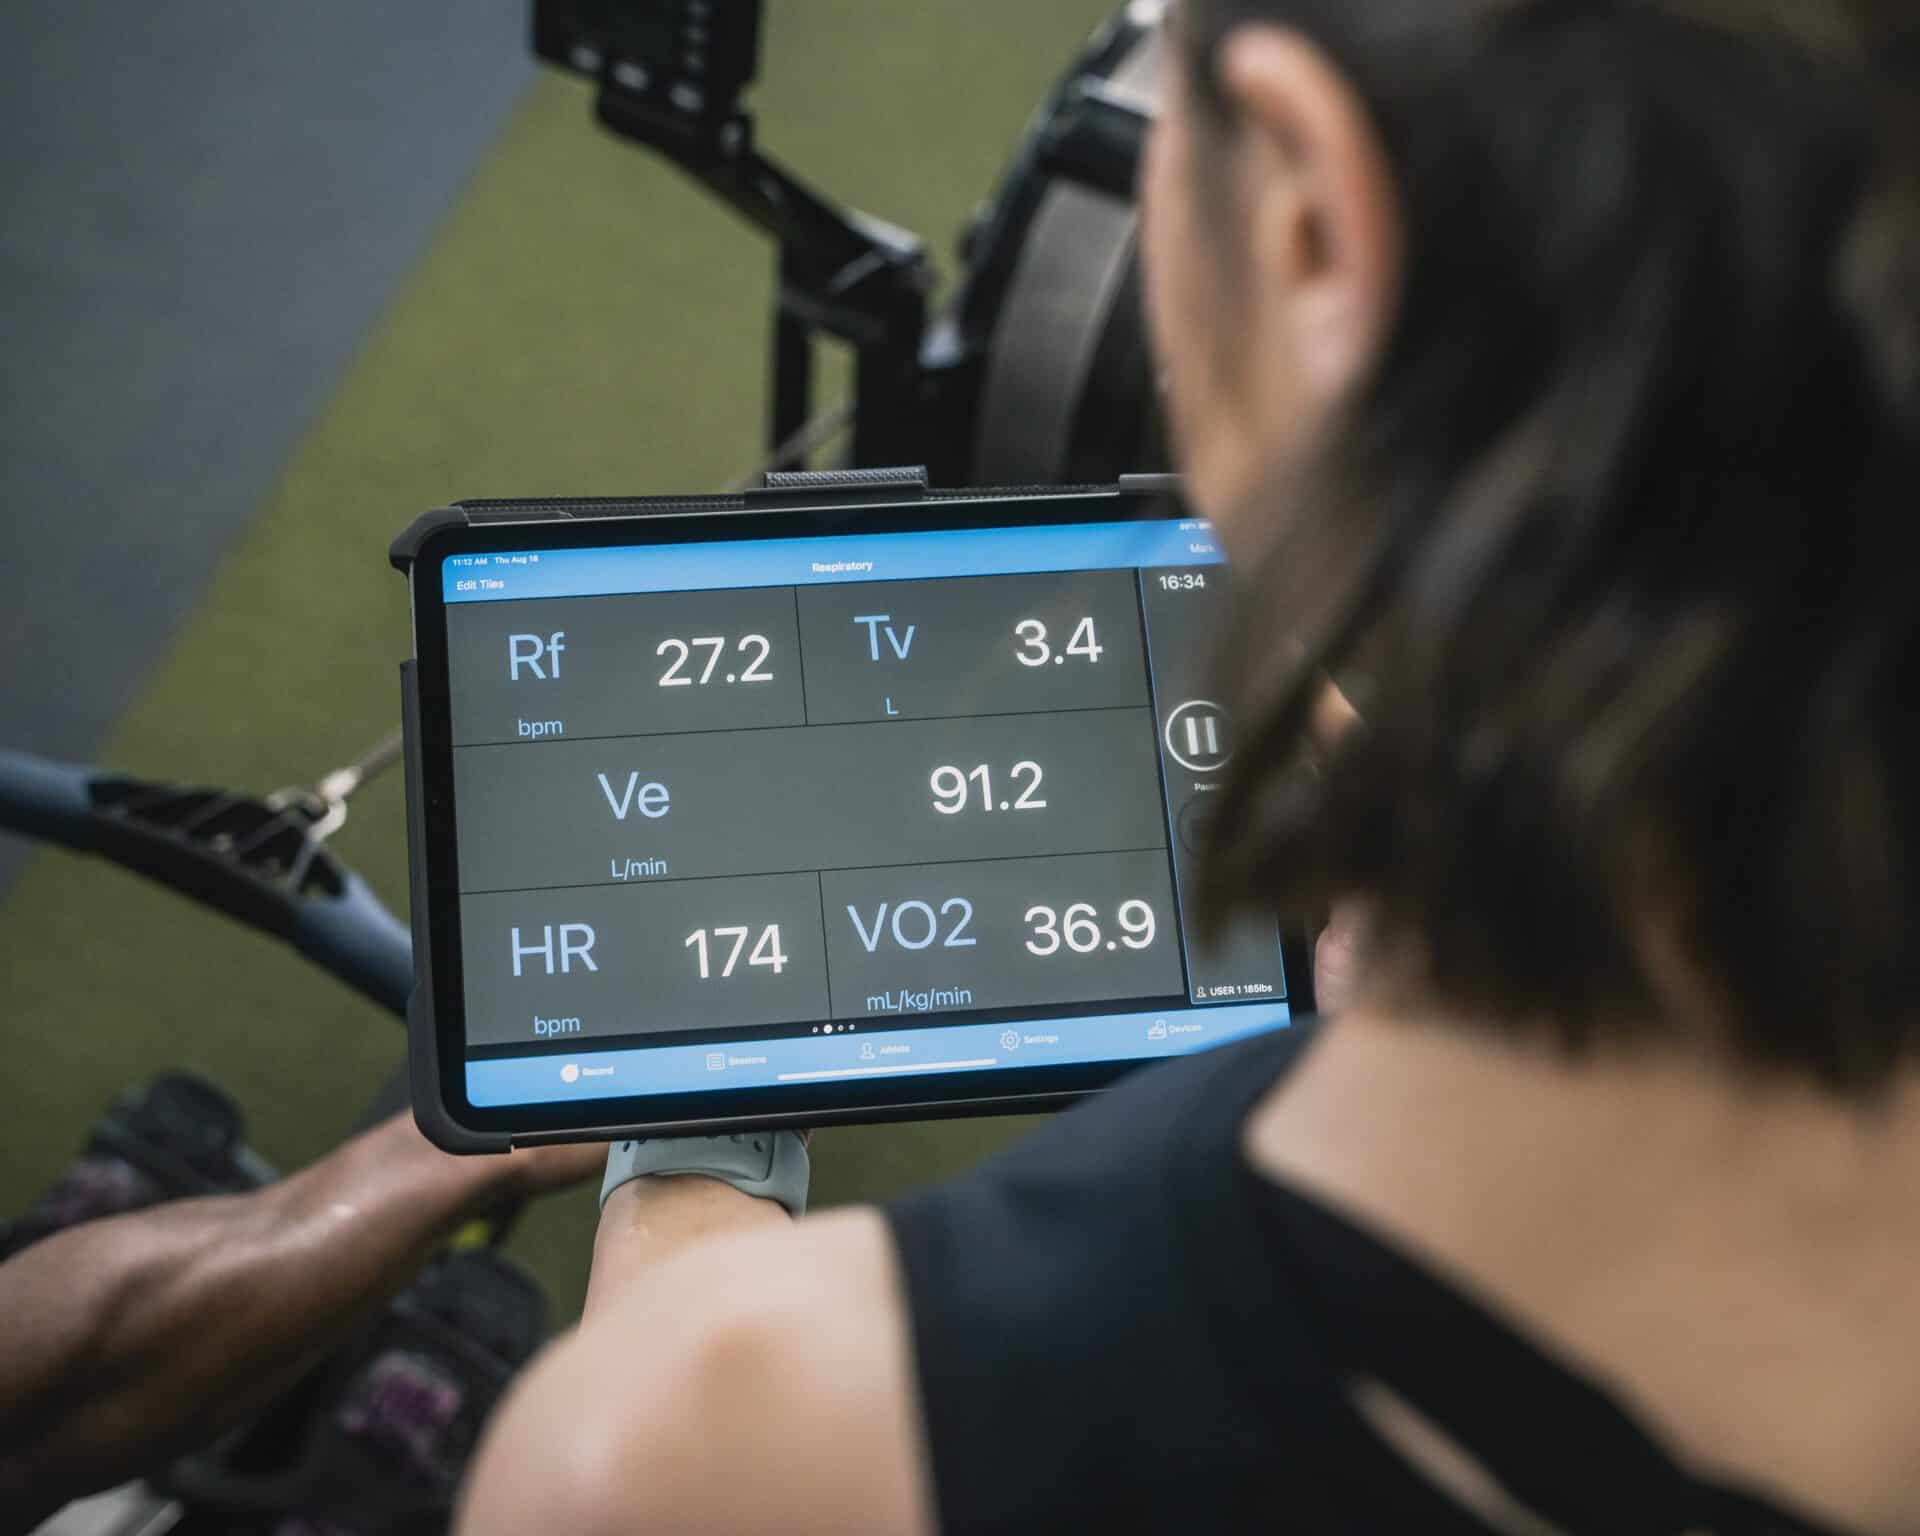 Reviewing VO2 performance data on an iPad in a fitness facility